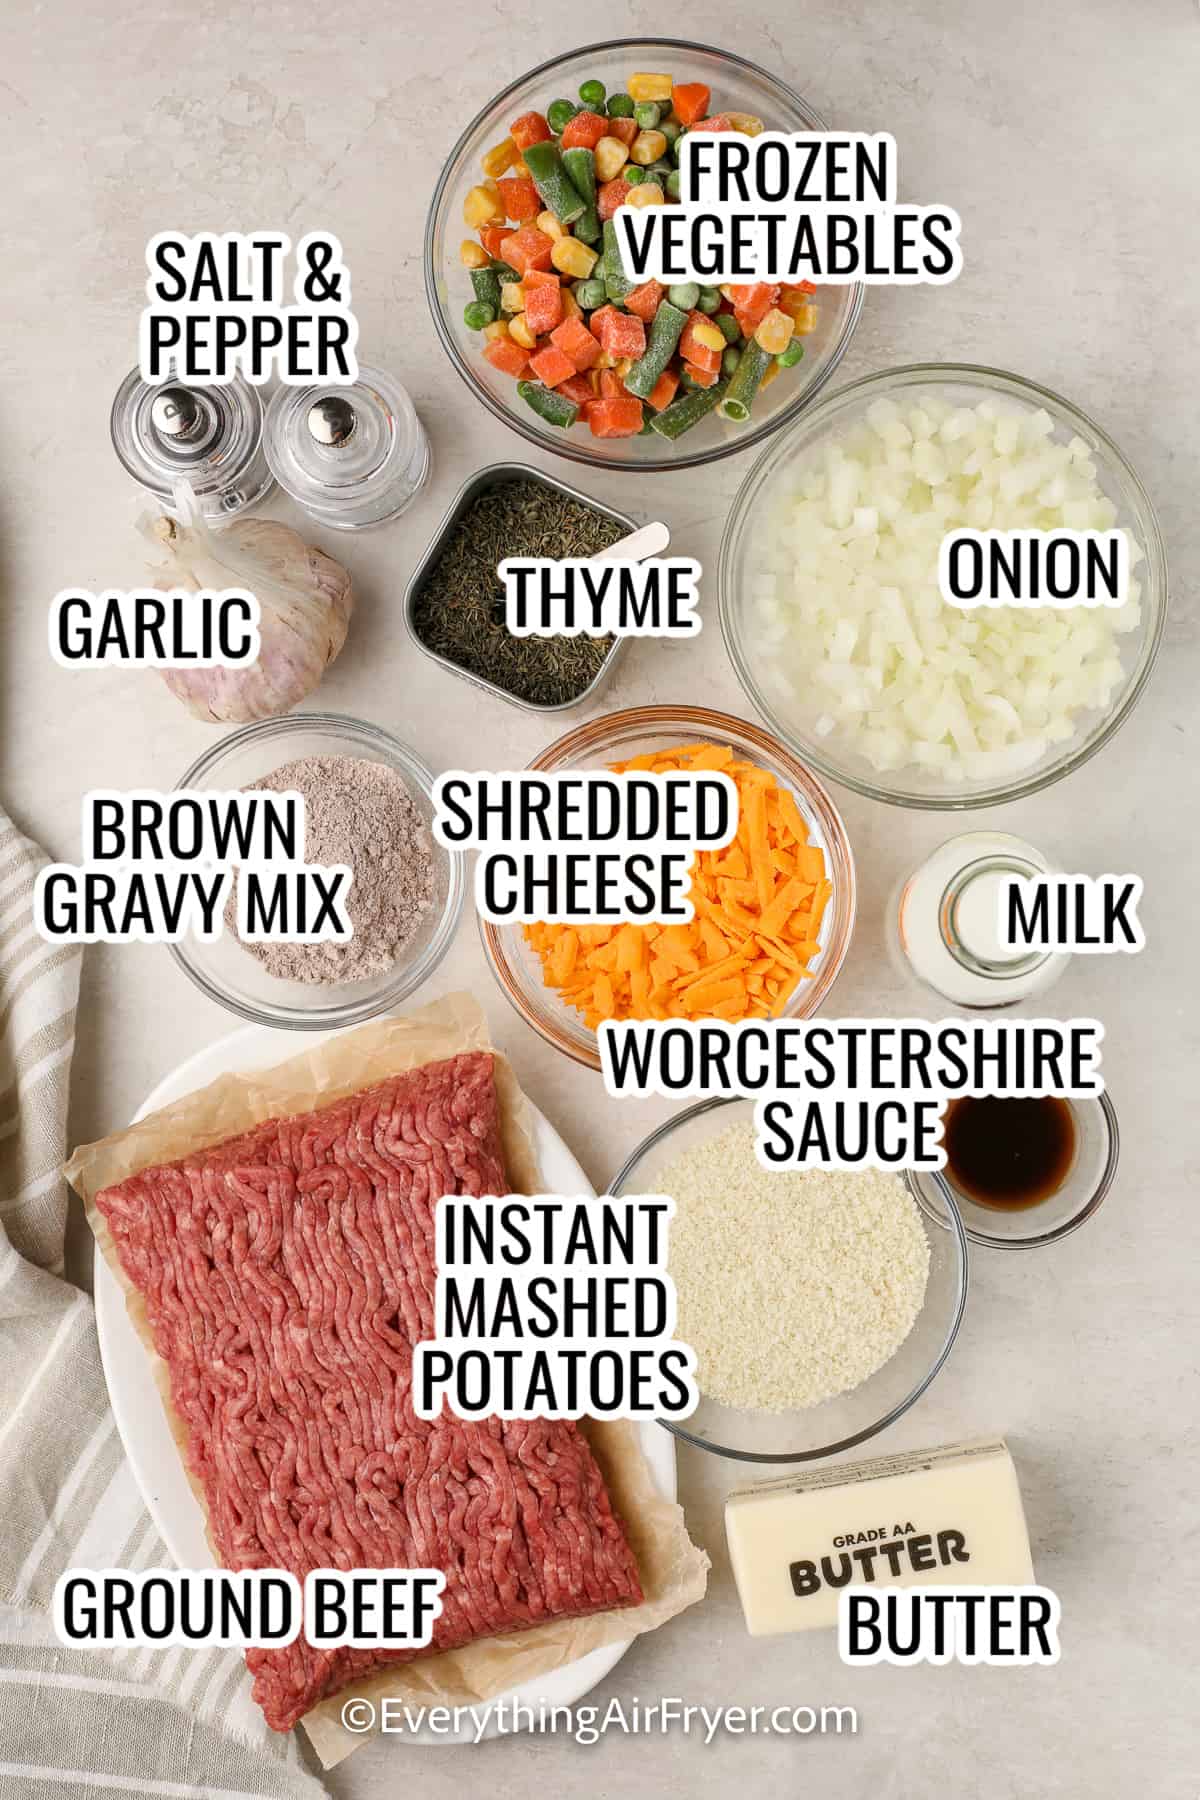 ingredients assembled to make air fryer shepherd's pie, including frozen mixed vegetables, shredded cheese, instant mashed potatoes, ground beef, brown gravy mix, garlic, onion, butter, milk, and worcestershire sauce